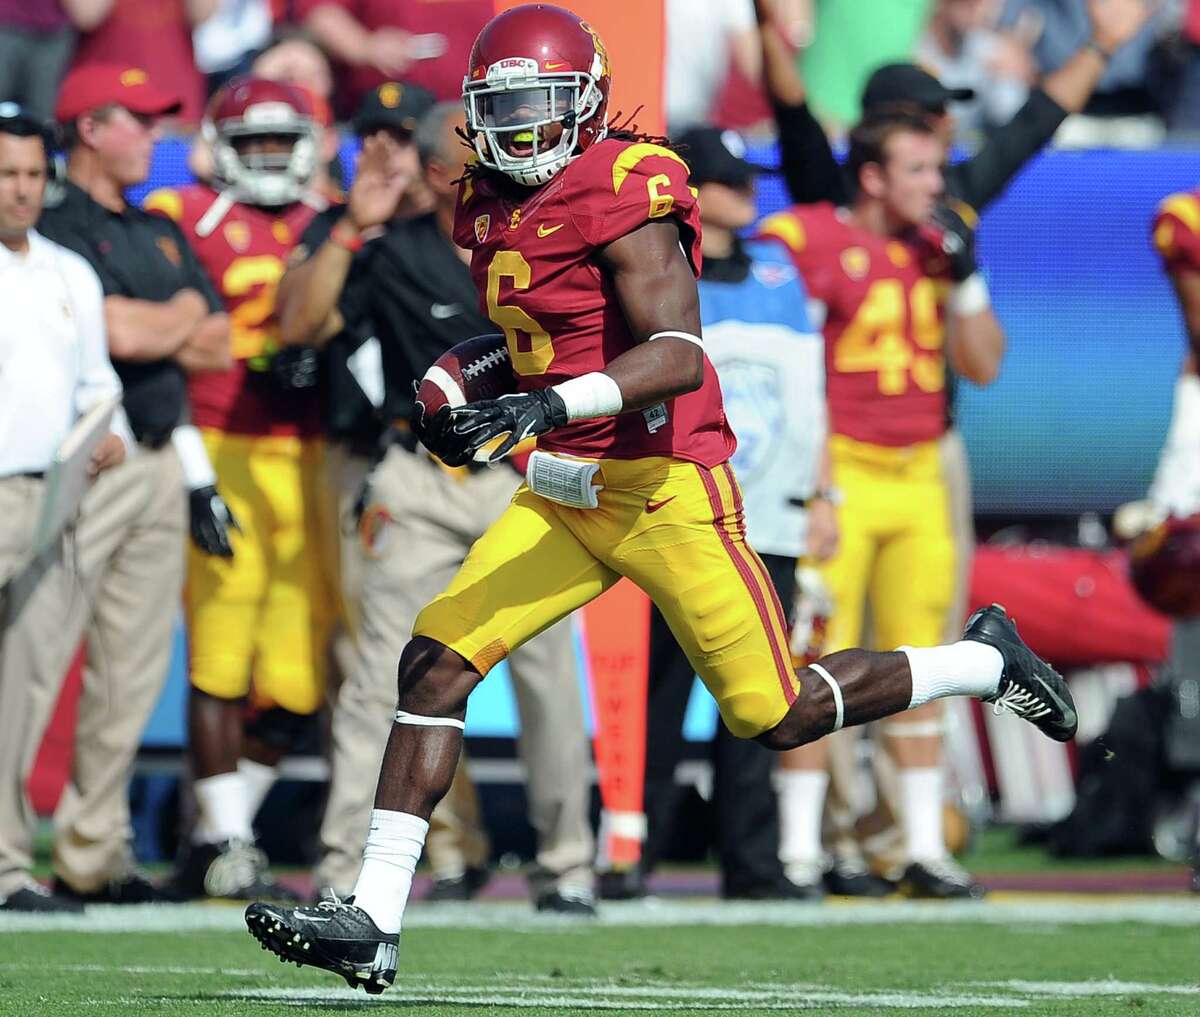 In this Oct. 26, 2013 file photo, Southern California safety Josh Shaw recovers a Utah fumble in a game in Los Angeles.